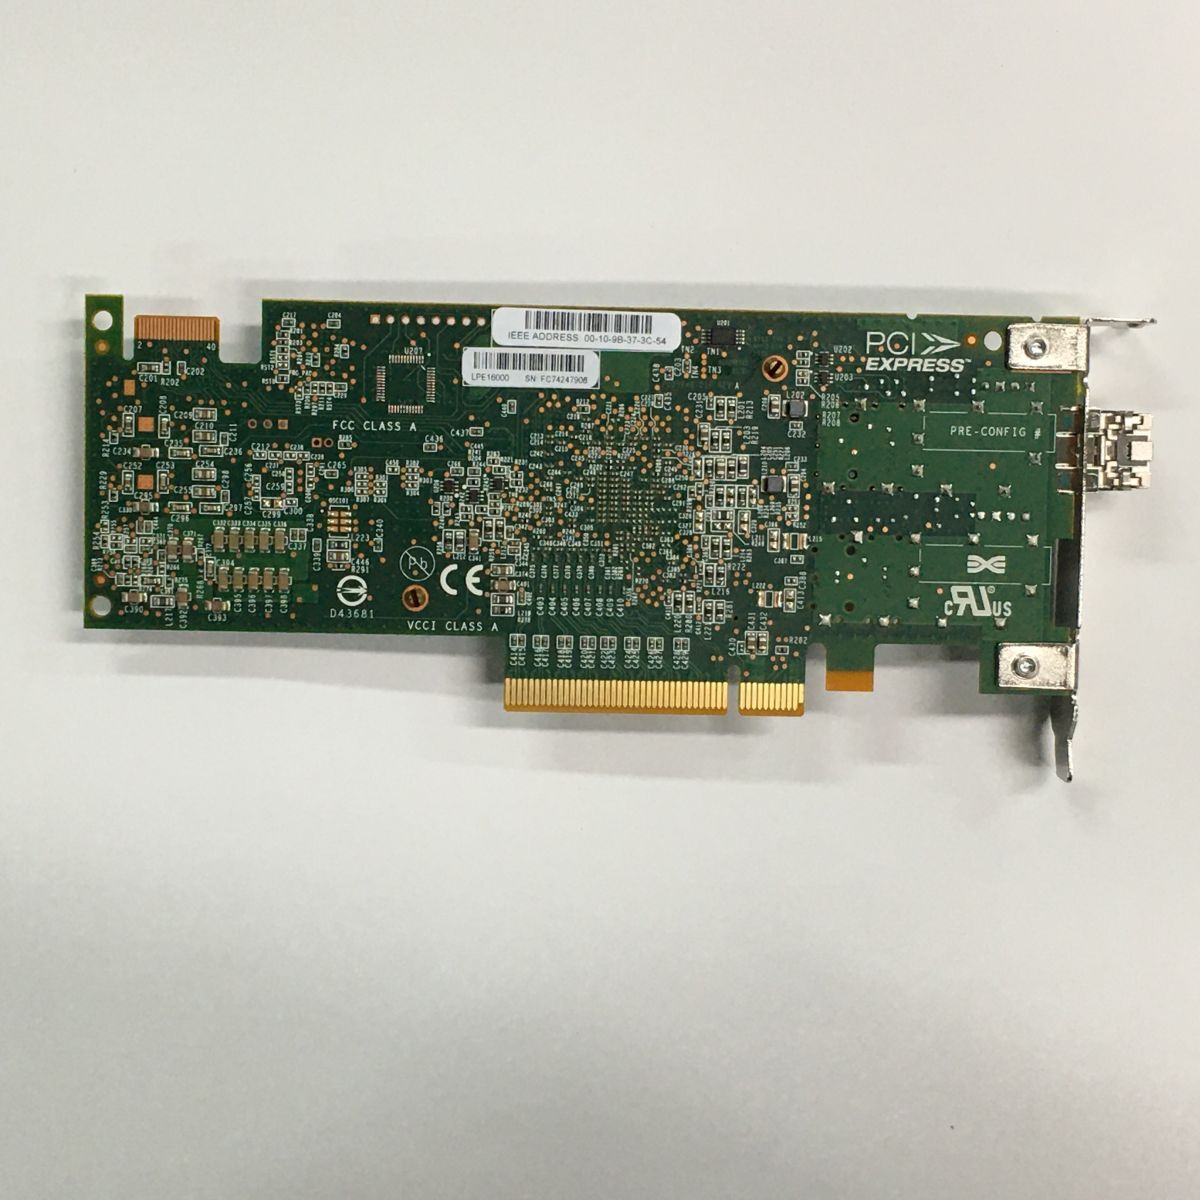 [ immediate payment ]FUJITSU Emulex LPE16000 FC Controller 16Gb/s 1ch +Avago light transceiver attaching low professional specification [ used parts / present condition goods ] (SV-F-355)